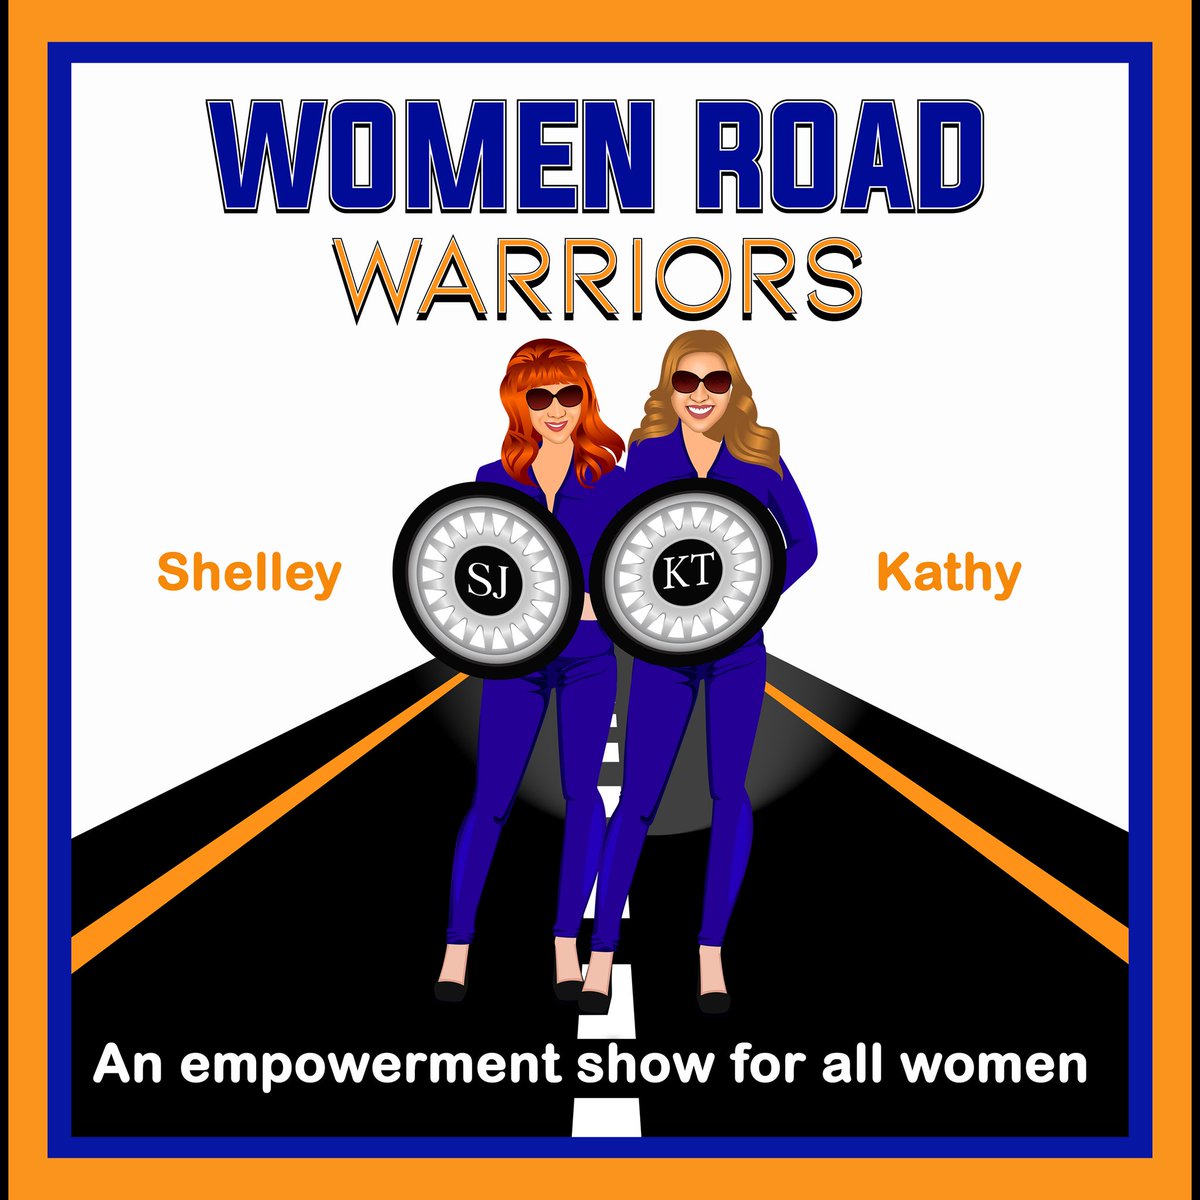 Enjoy this podcast of our honored guest: Women Road Warriors @WomRoadWarriors @pcast_ol @tpc_ol @wh2pod @bus_ol A lively talk show hosted by Shelley Johnson & Kathy Tuccaro that features experts and celebrities with topics to empower & inspire women womenroadwarriors.com